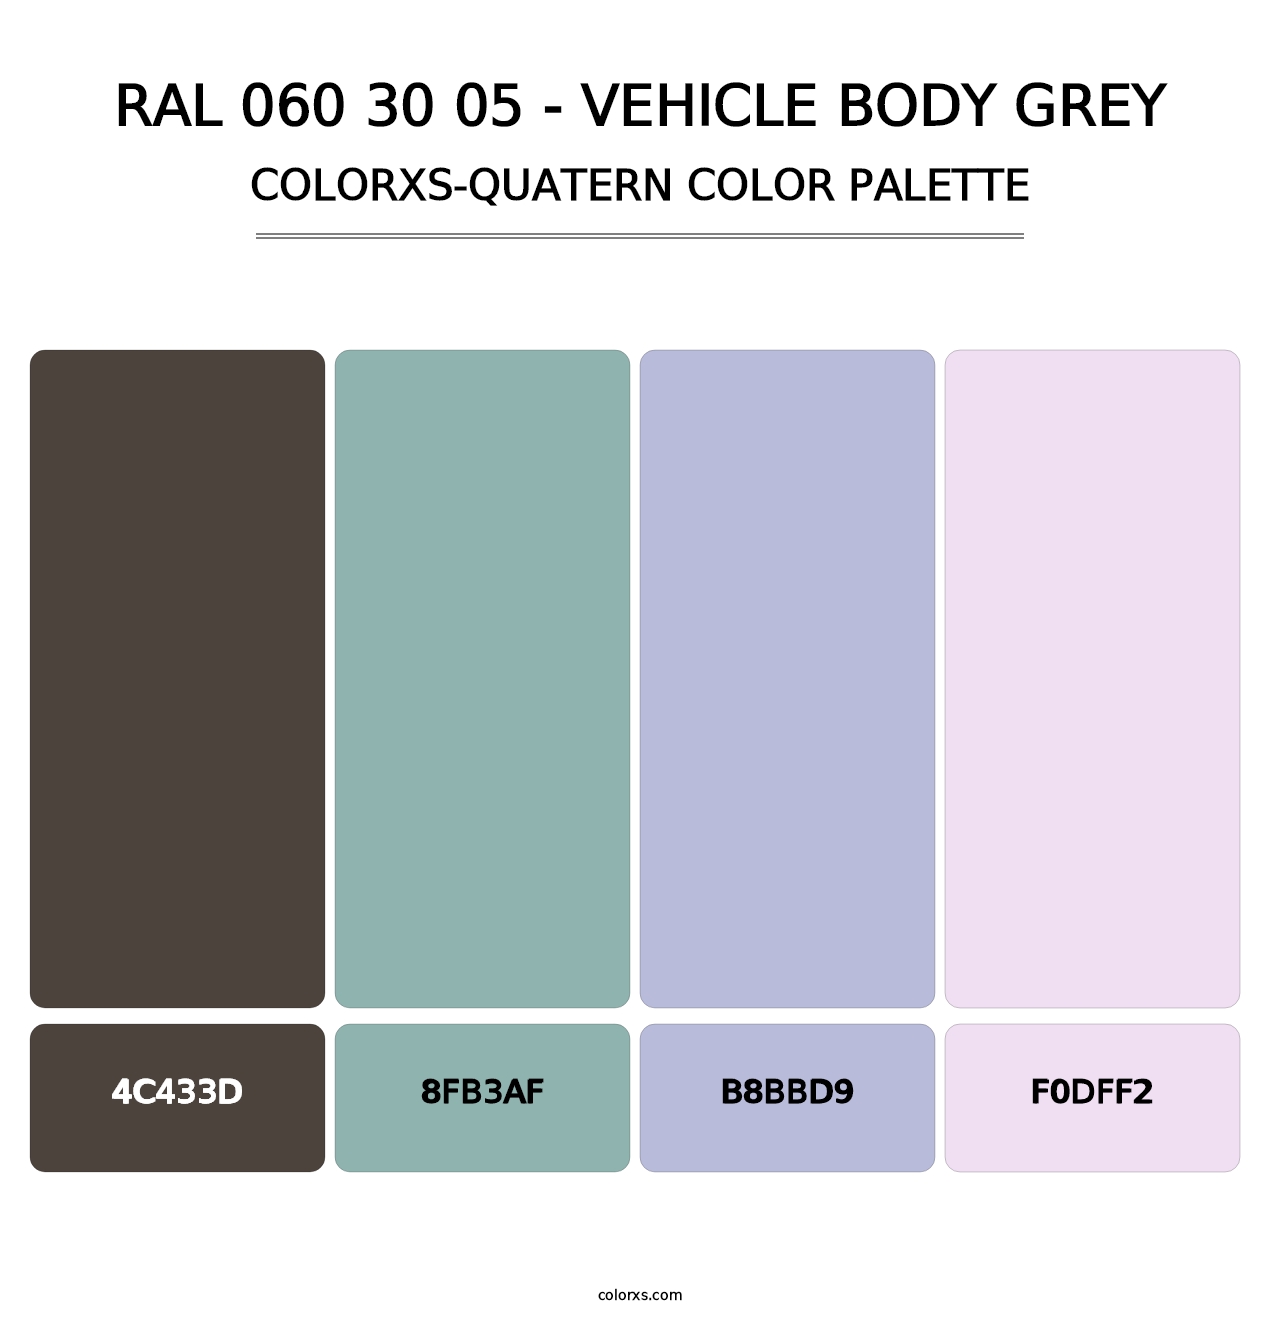 RAL 060 30 05 - Vehicle Body Grey - Colorxs Quatern Palette